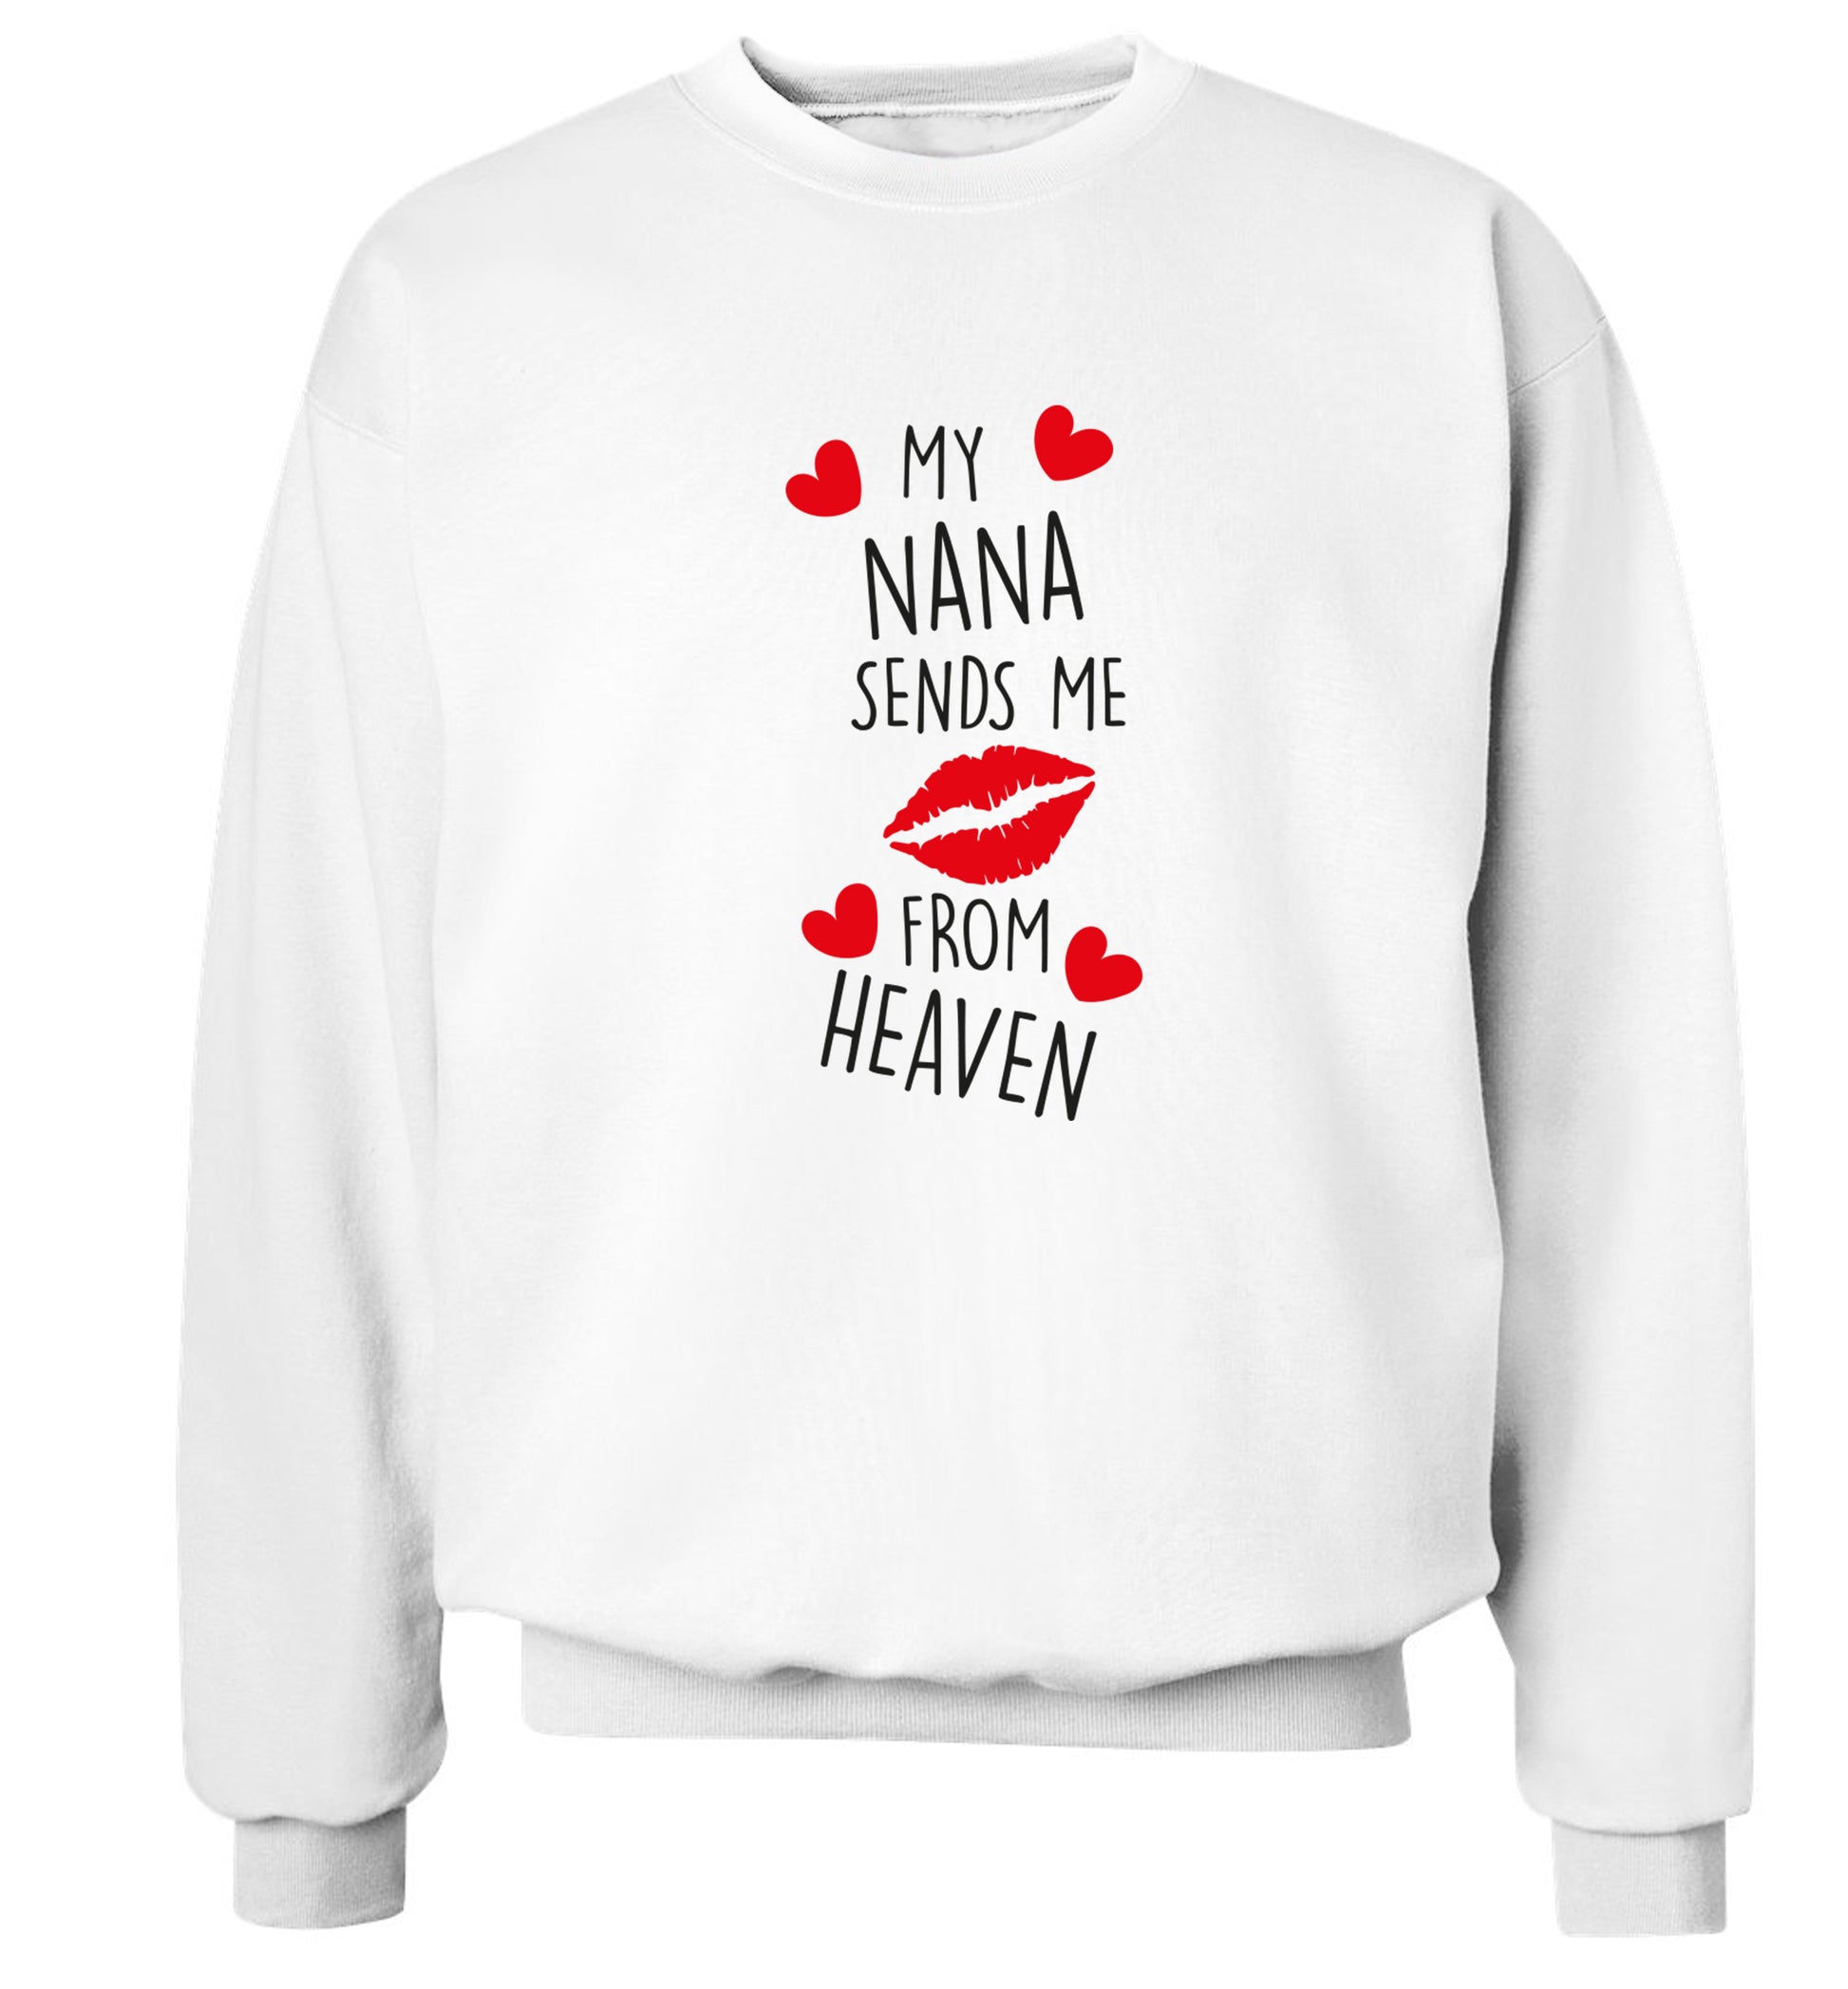 My nana sends me kisses from heaven Adult's unisex white Sweater 2XL